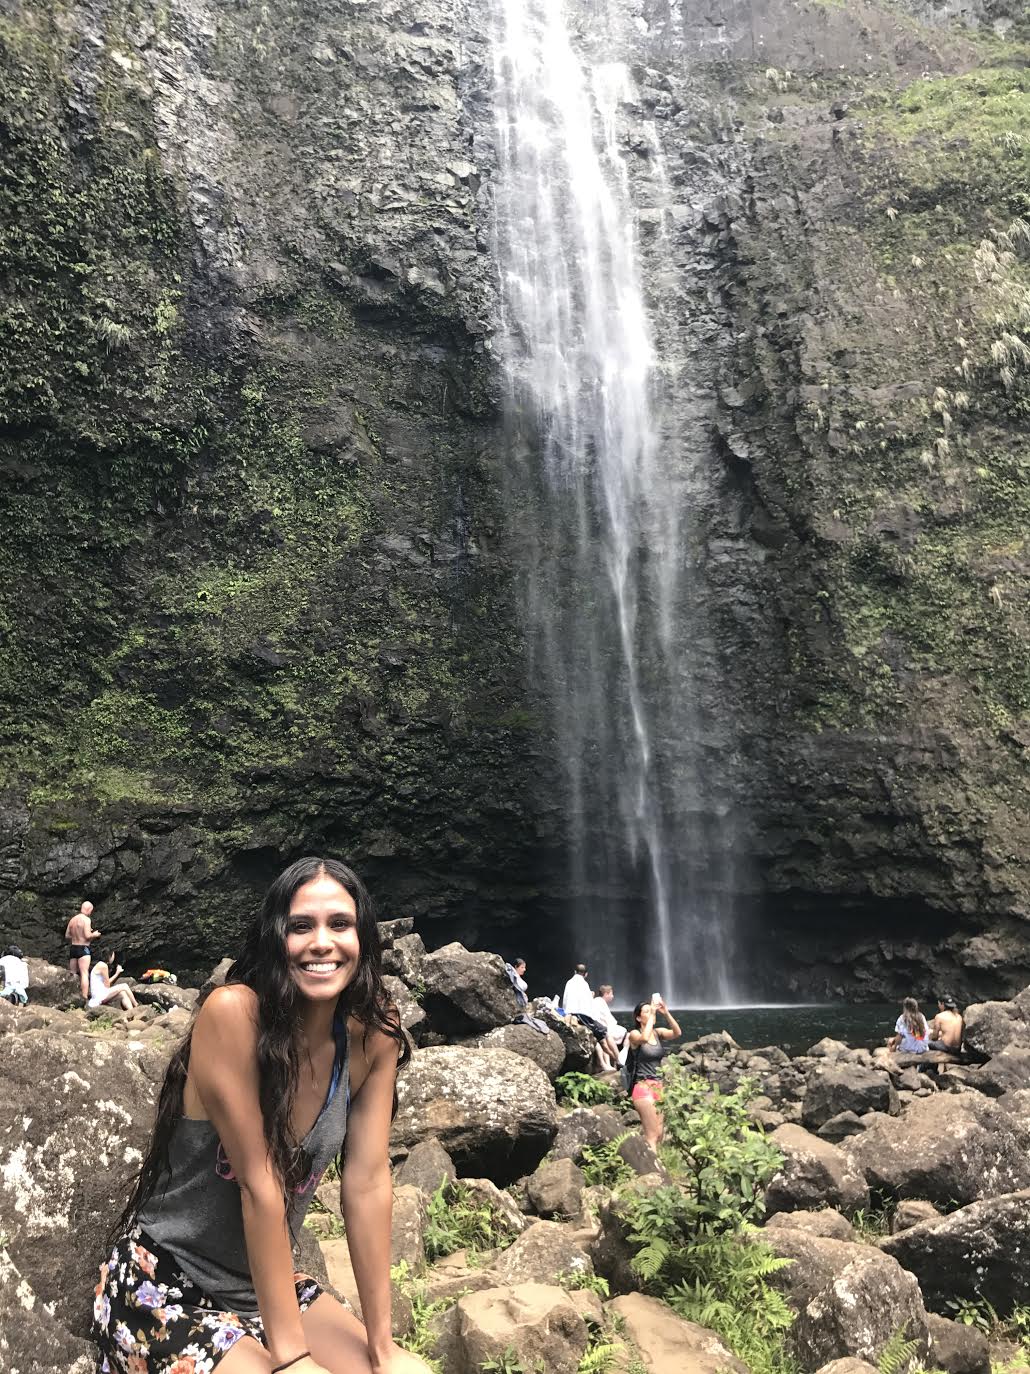 Picture of Kimberly by a waterfall in Hawaii.